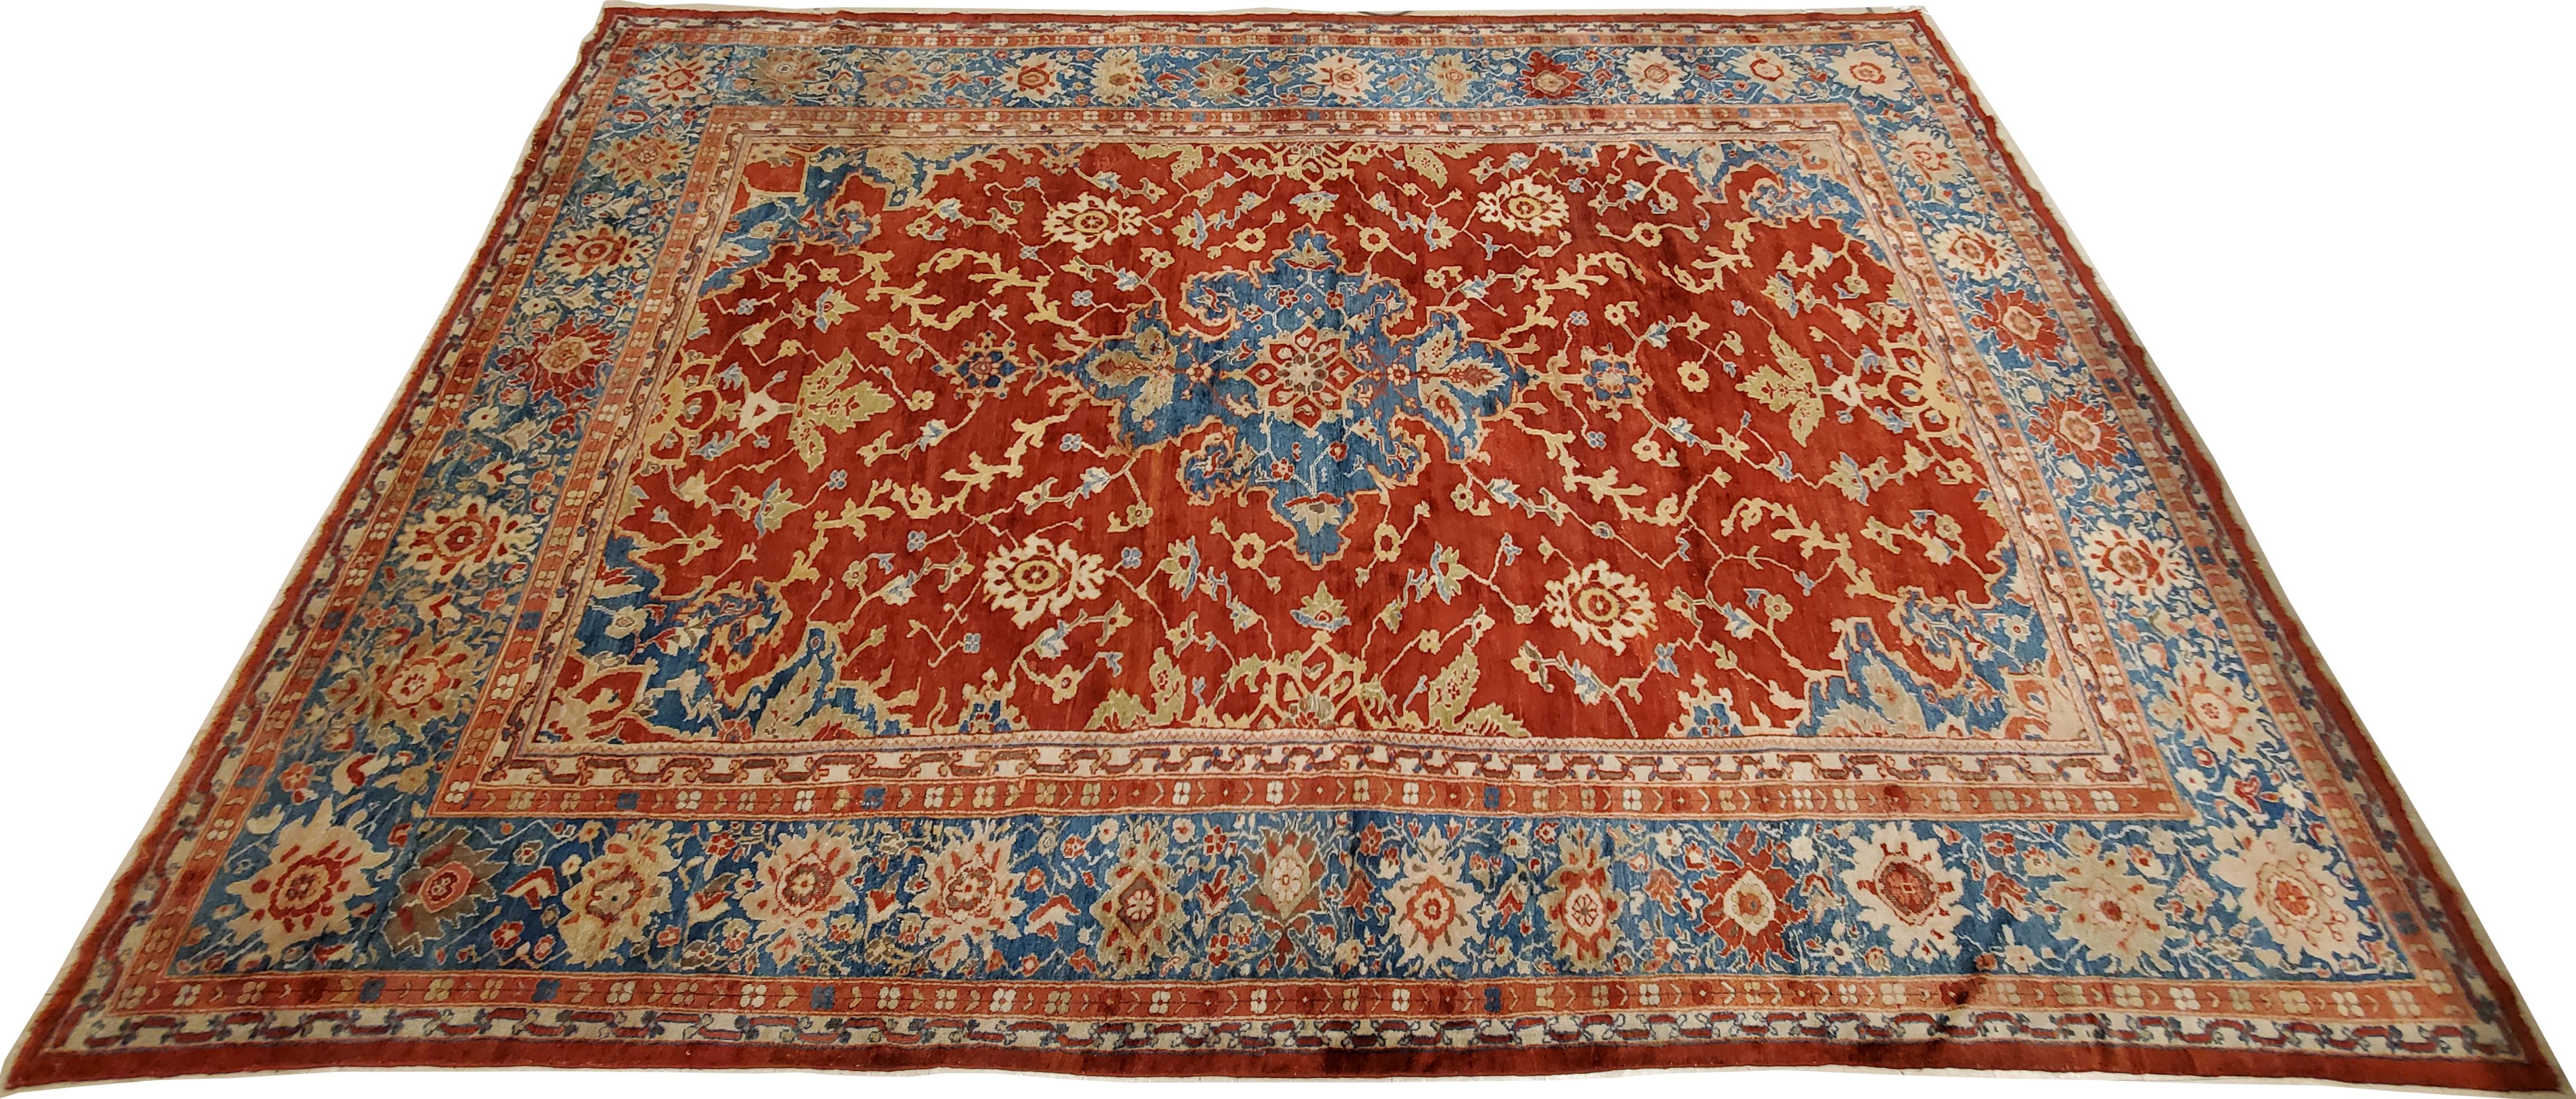 Antique Persian Sultanabad Carpet, Handmade Oriental Rug, Red, Light Blue & Gold In Good Condition For Sale In Port Washington, NY